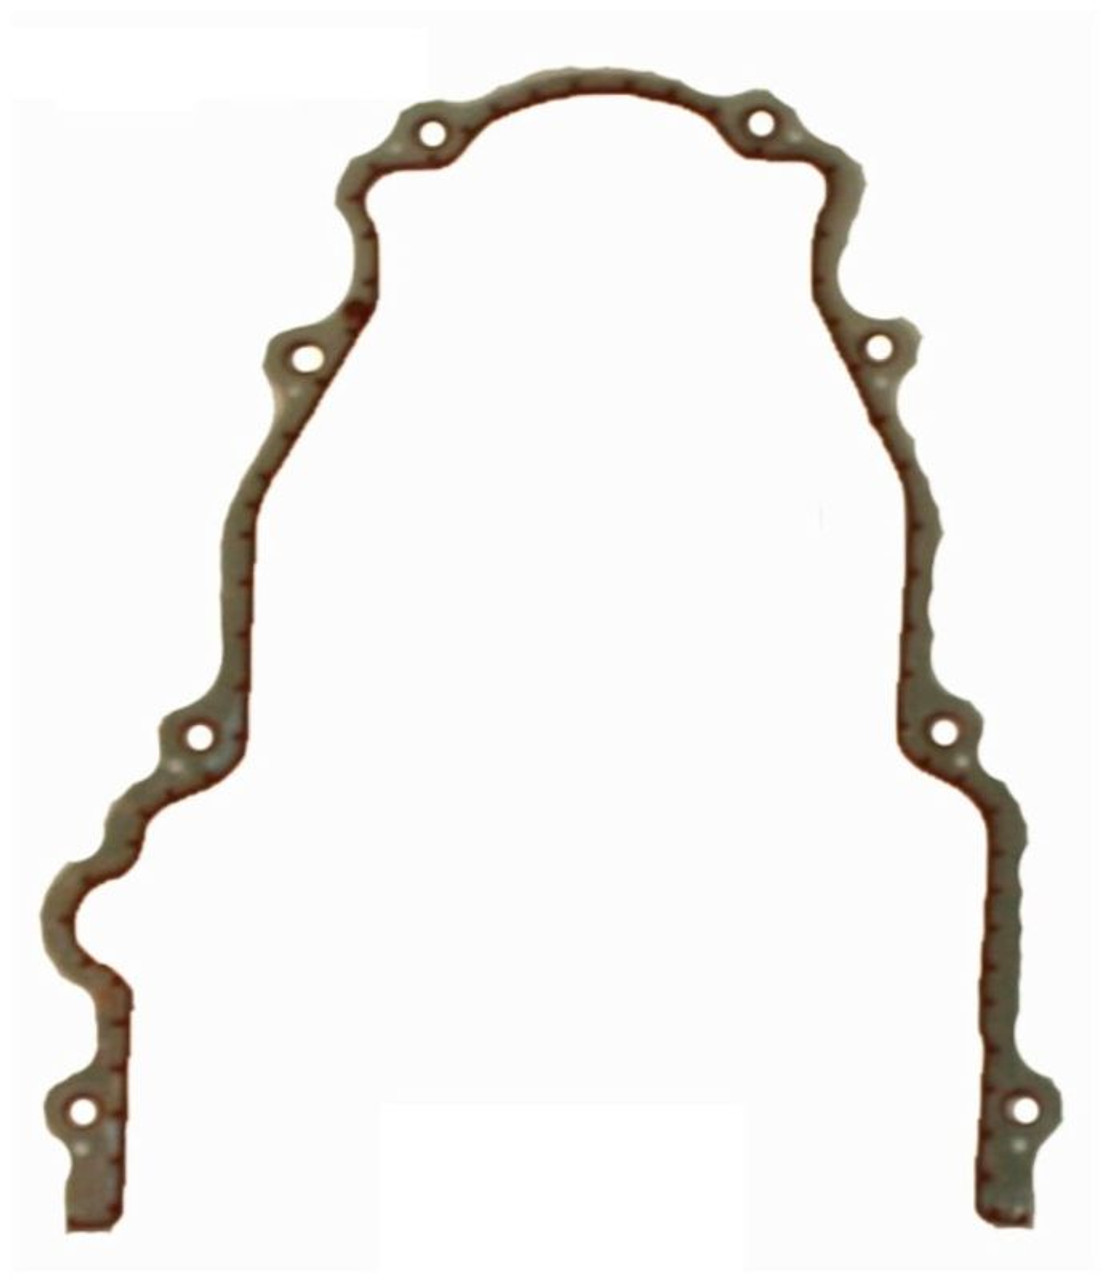 2003 Chevrolet Express 3500 6.0L Engine Timing Cover Gasket TCG293-A -122